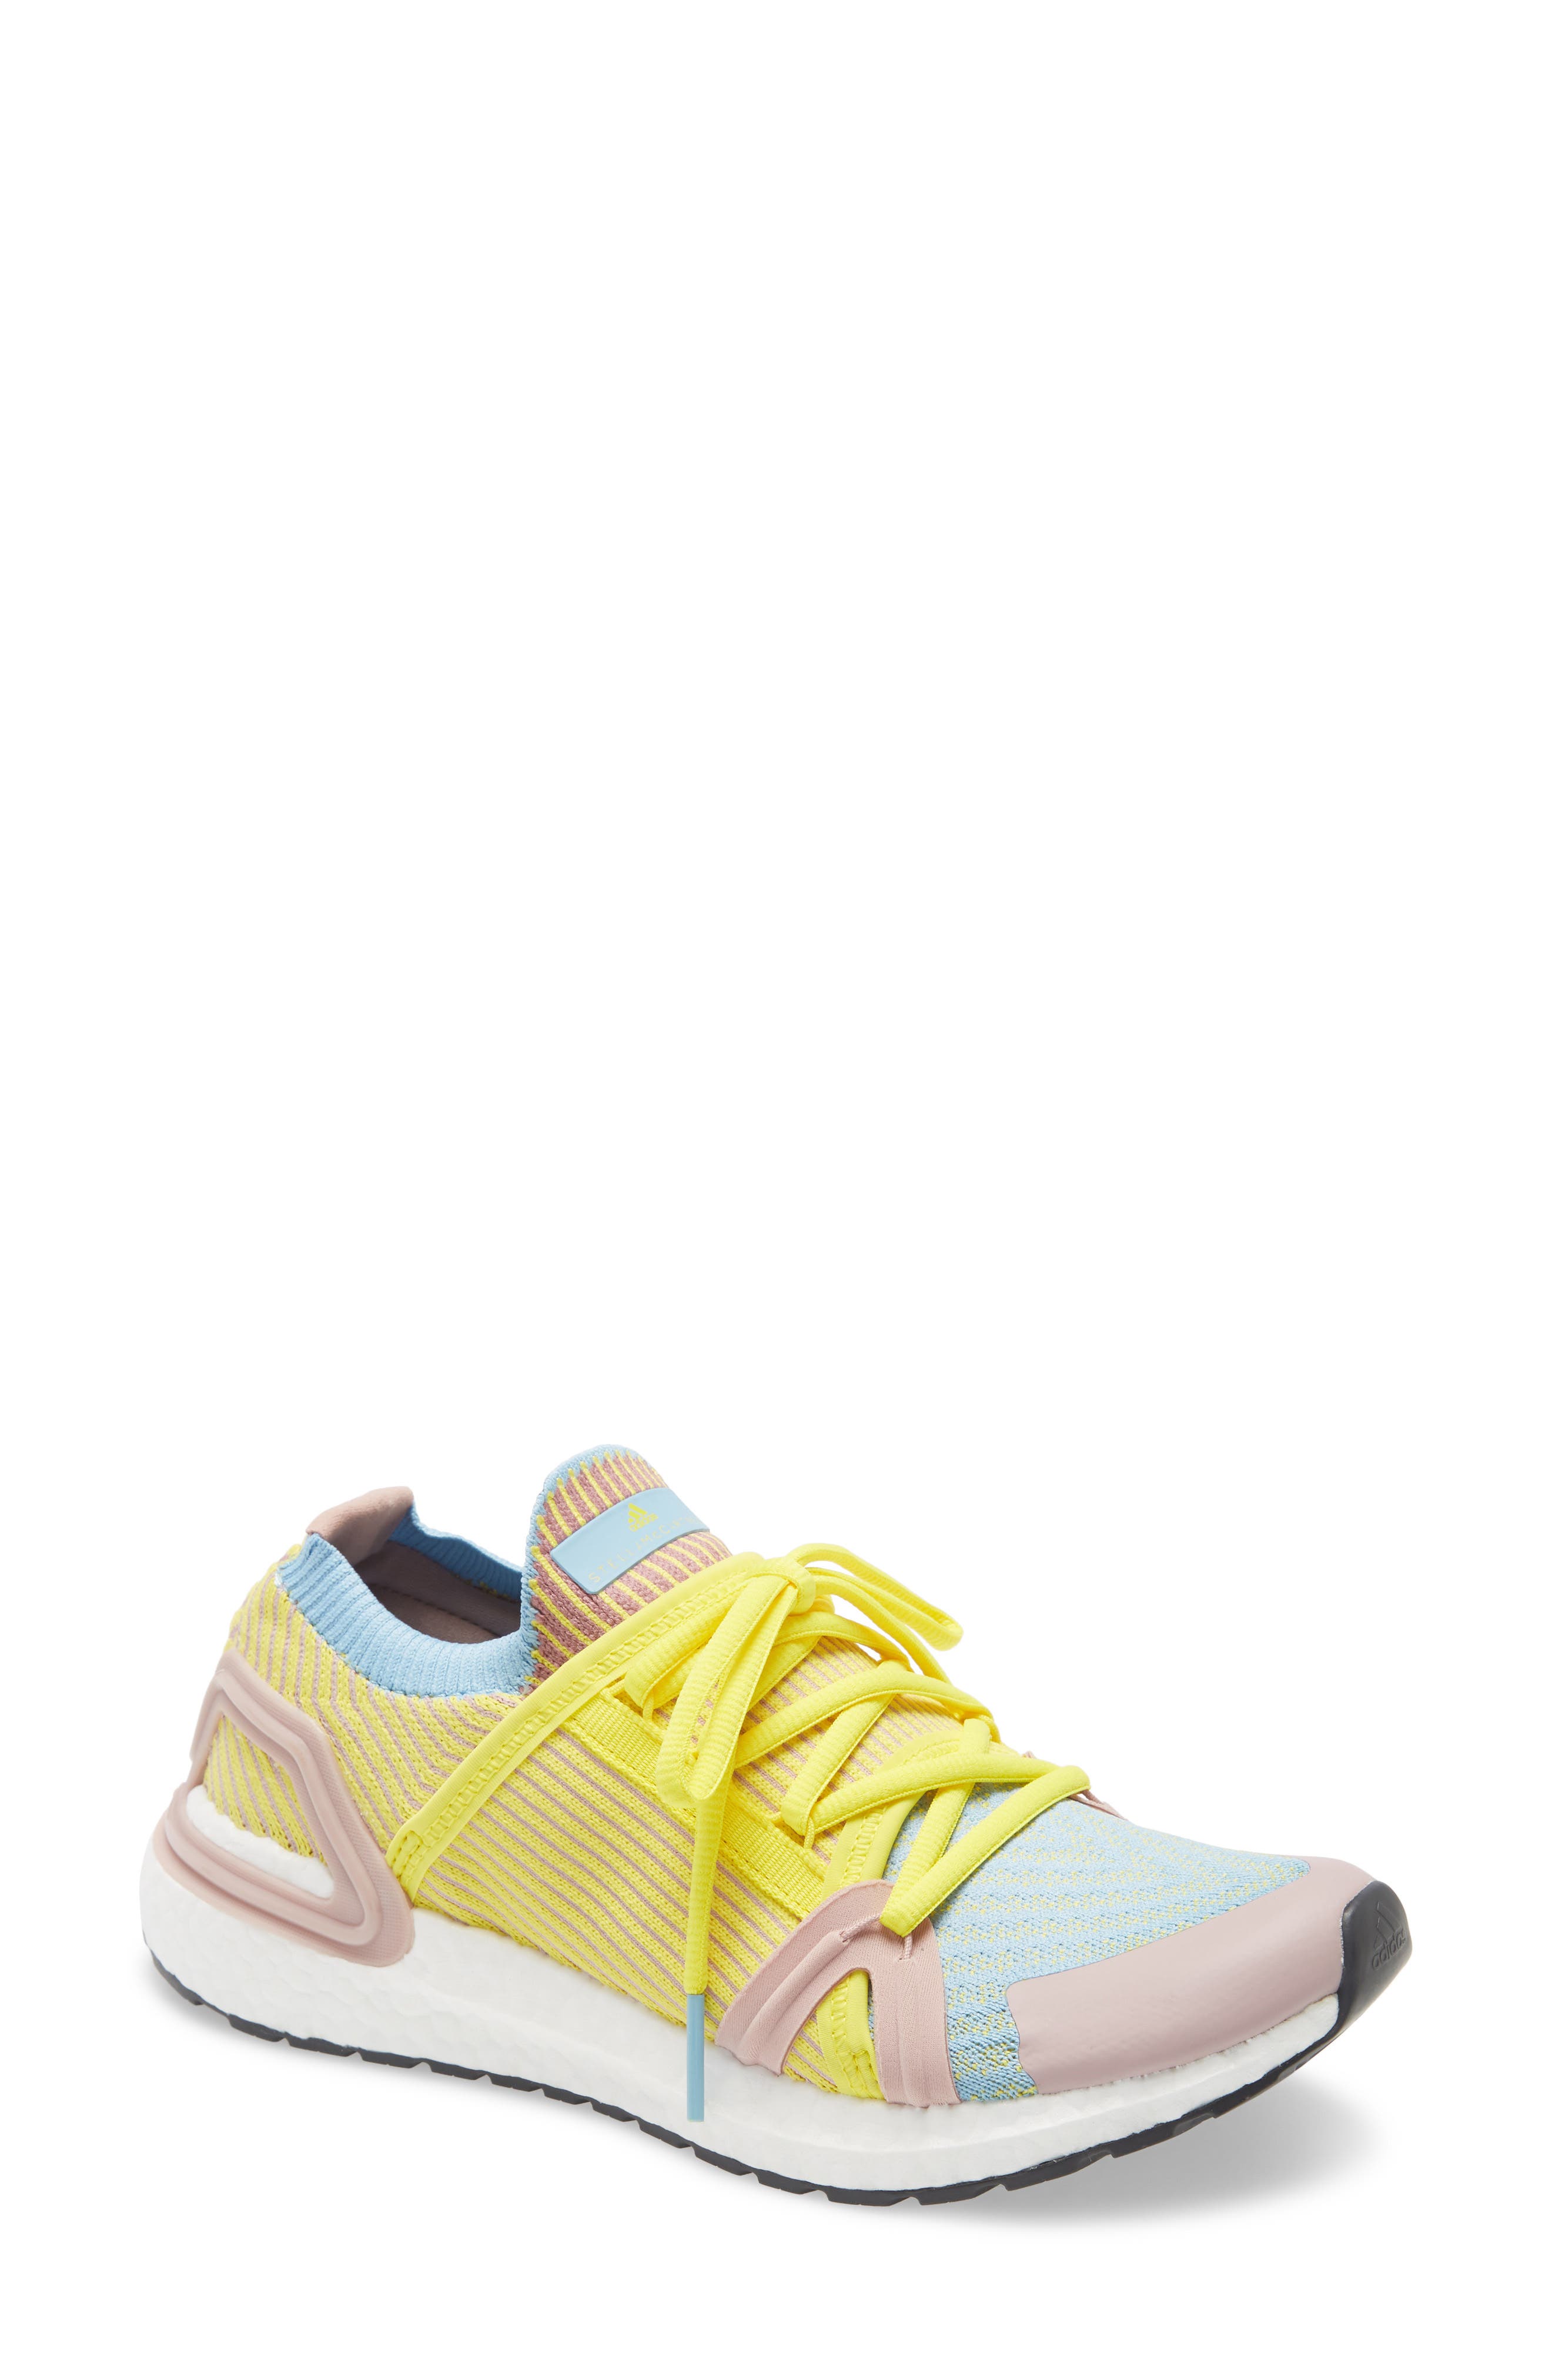 yellow adidas shoes womens